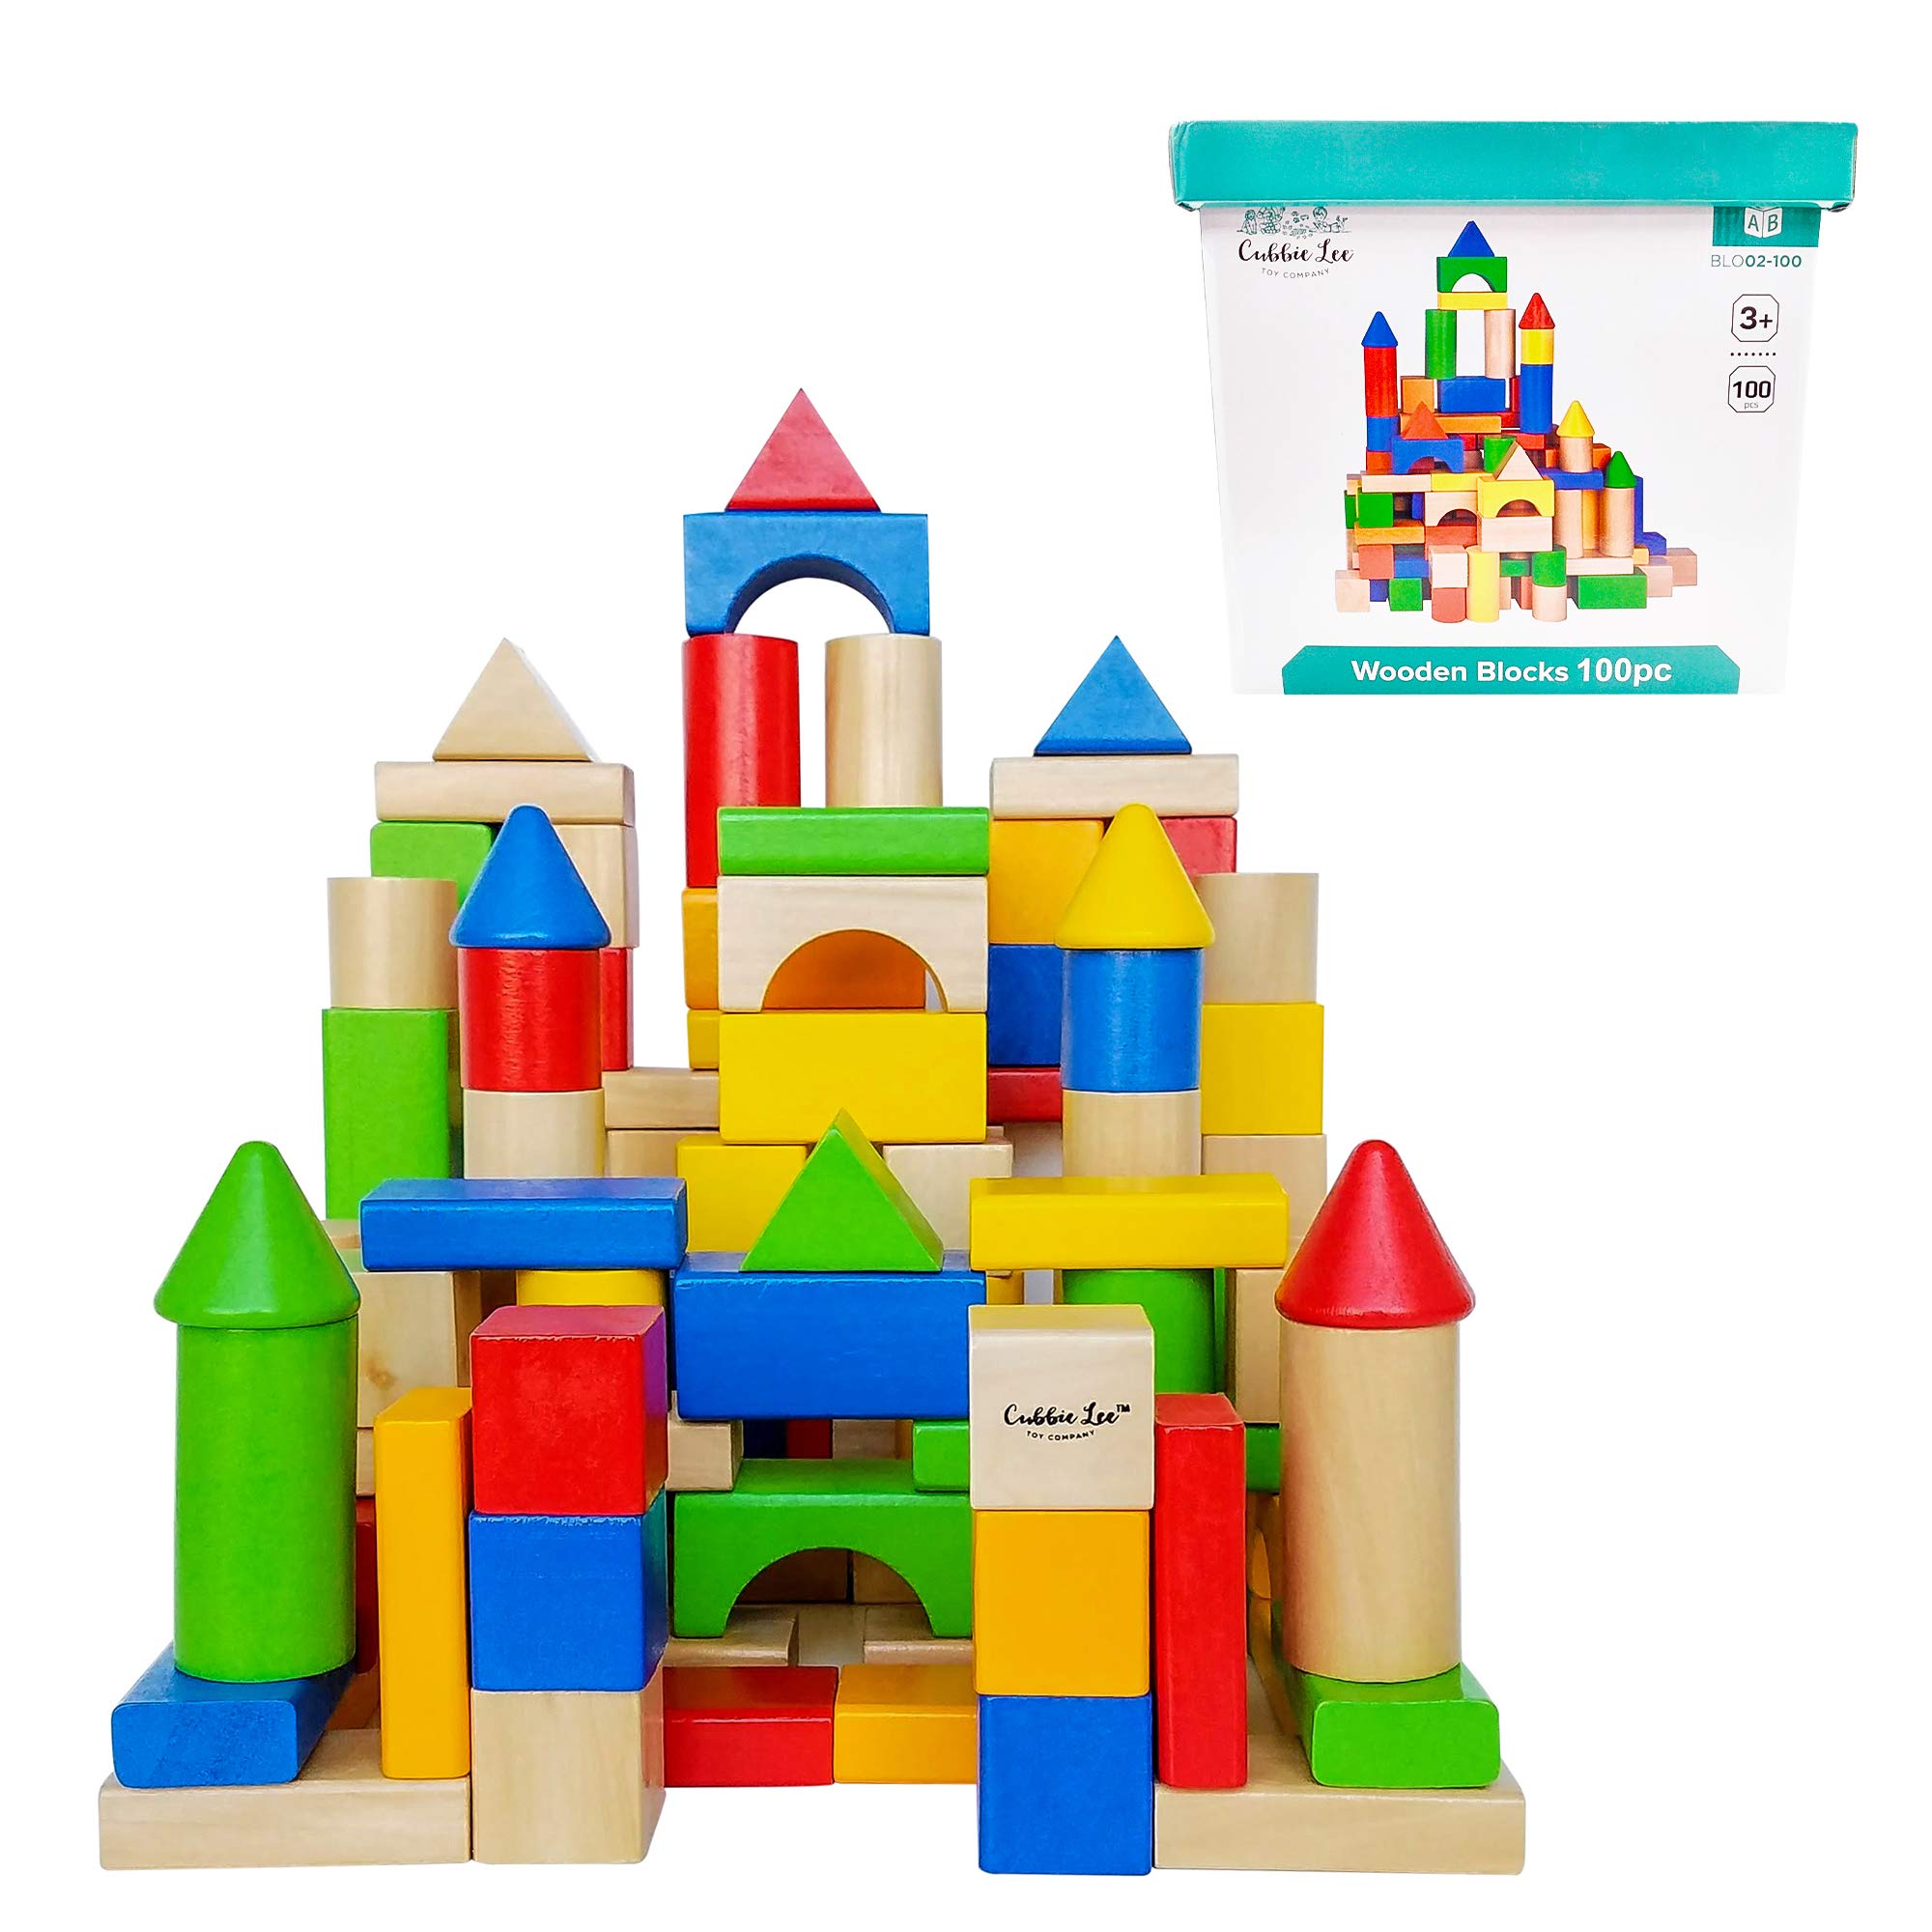 Cubbie Lee Premium Wooden Building Blocks Set - 100 pc for Toddlers Preschool Age - Classic Hardwood Plain & Colored Small Wood Block Pieces for Boys & Girls - Classic Build & Play Toy